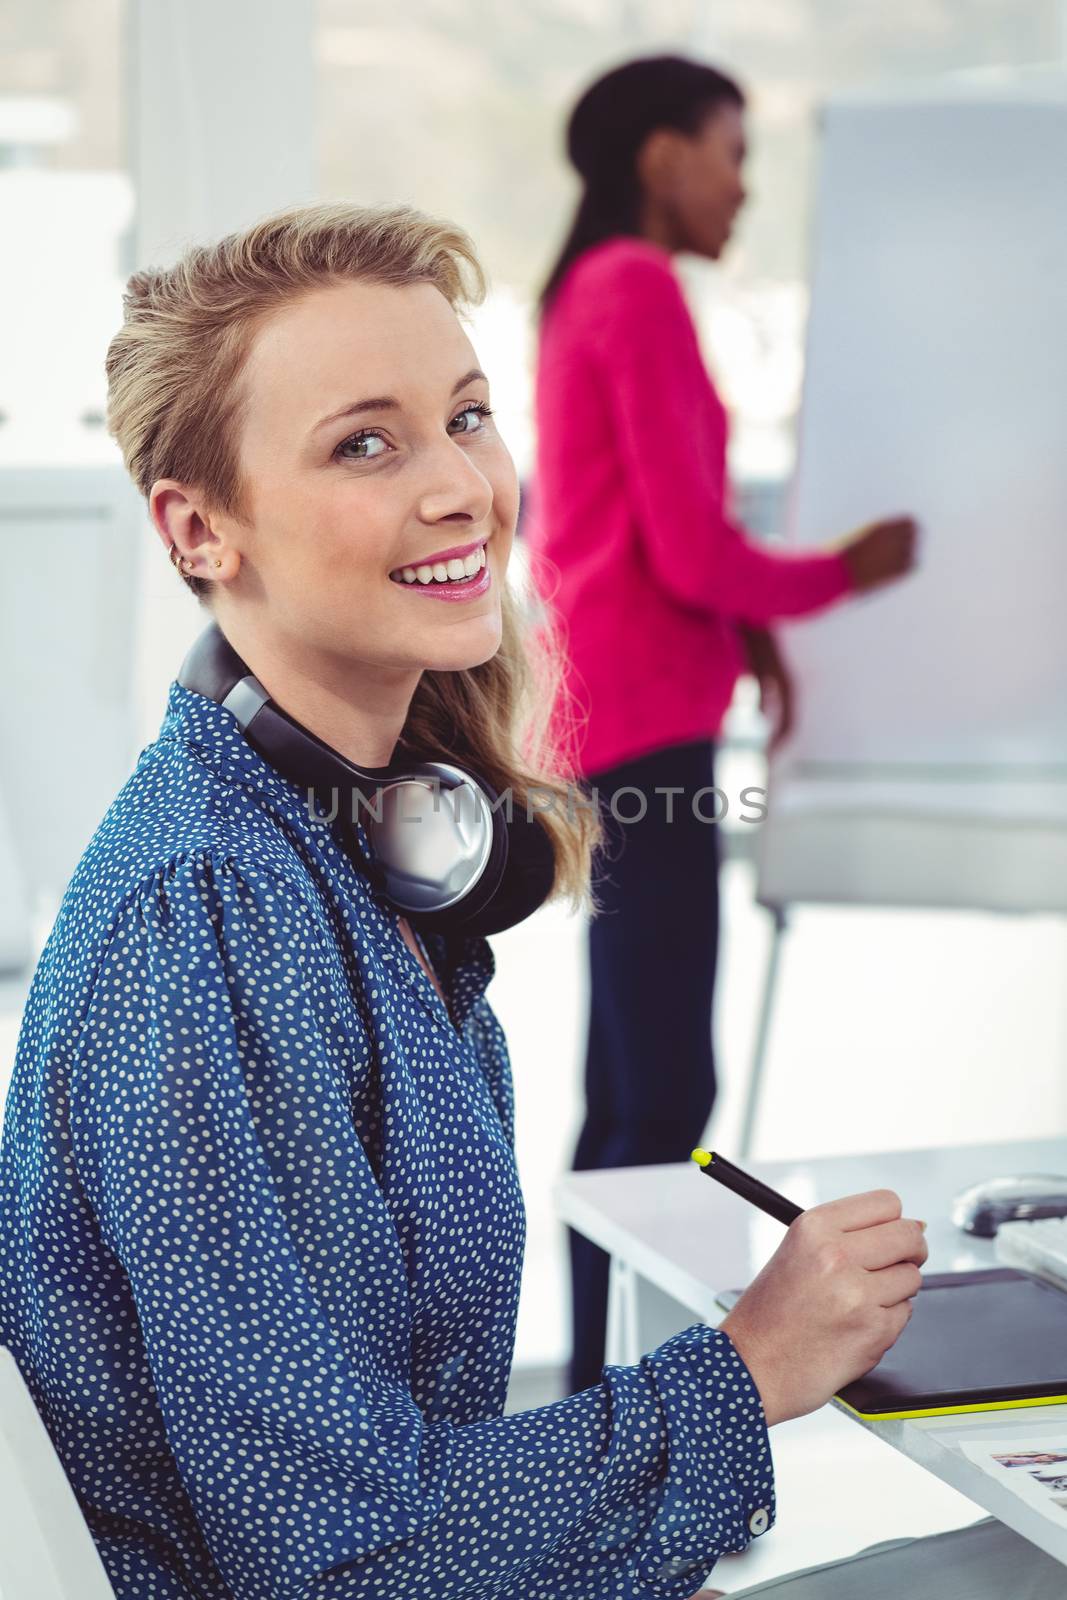 Graphic designer wearing headphones at desk in casual office